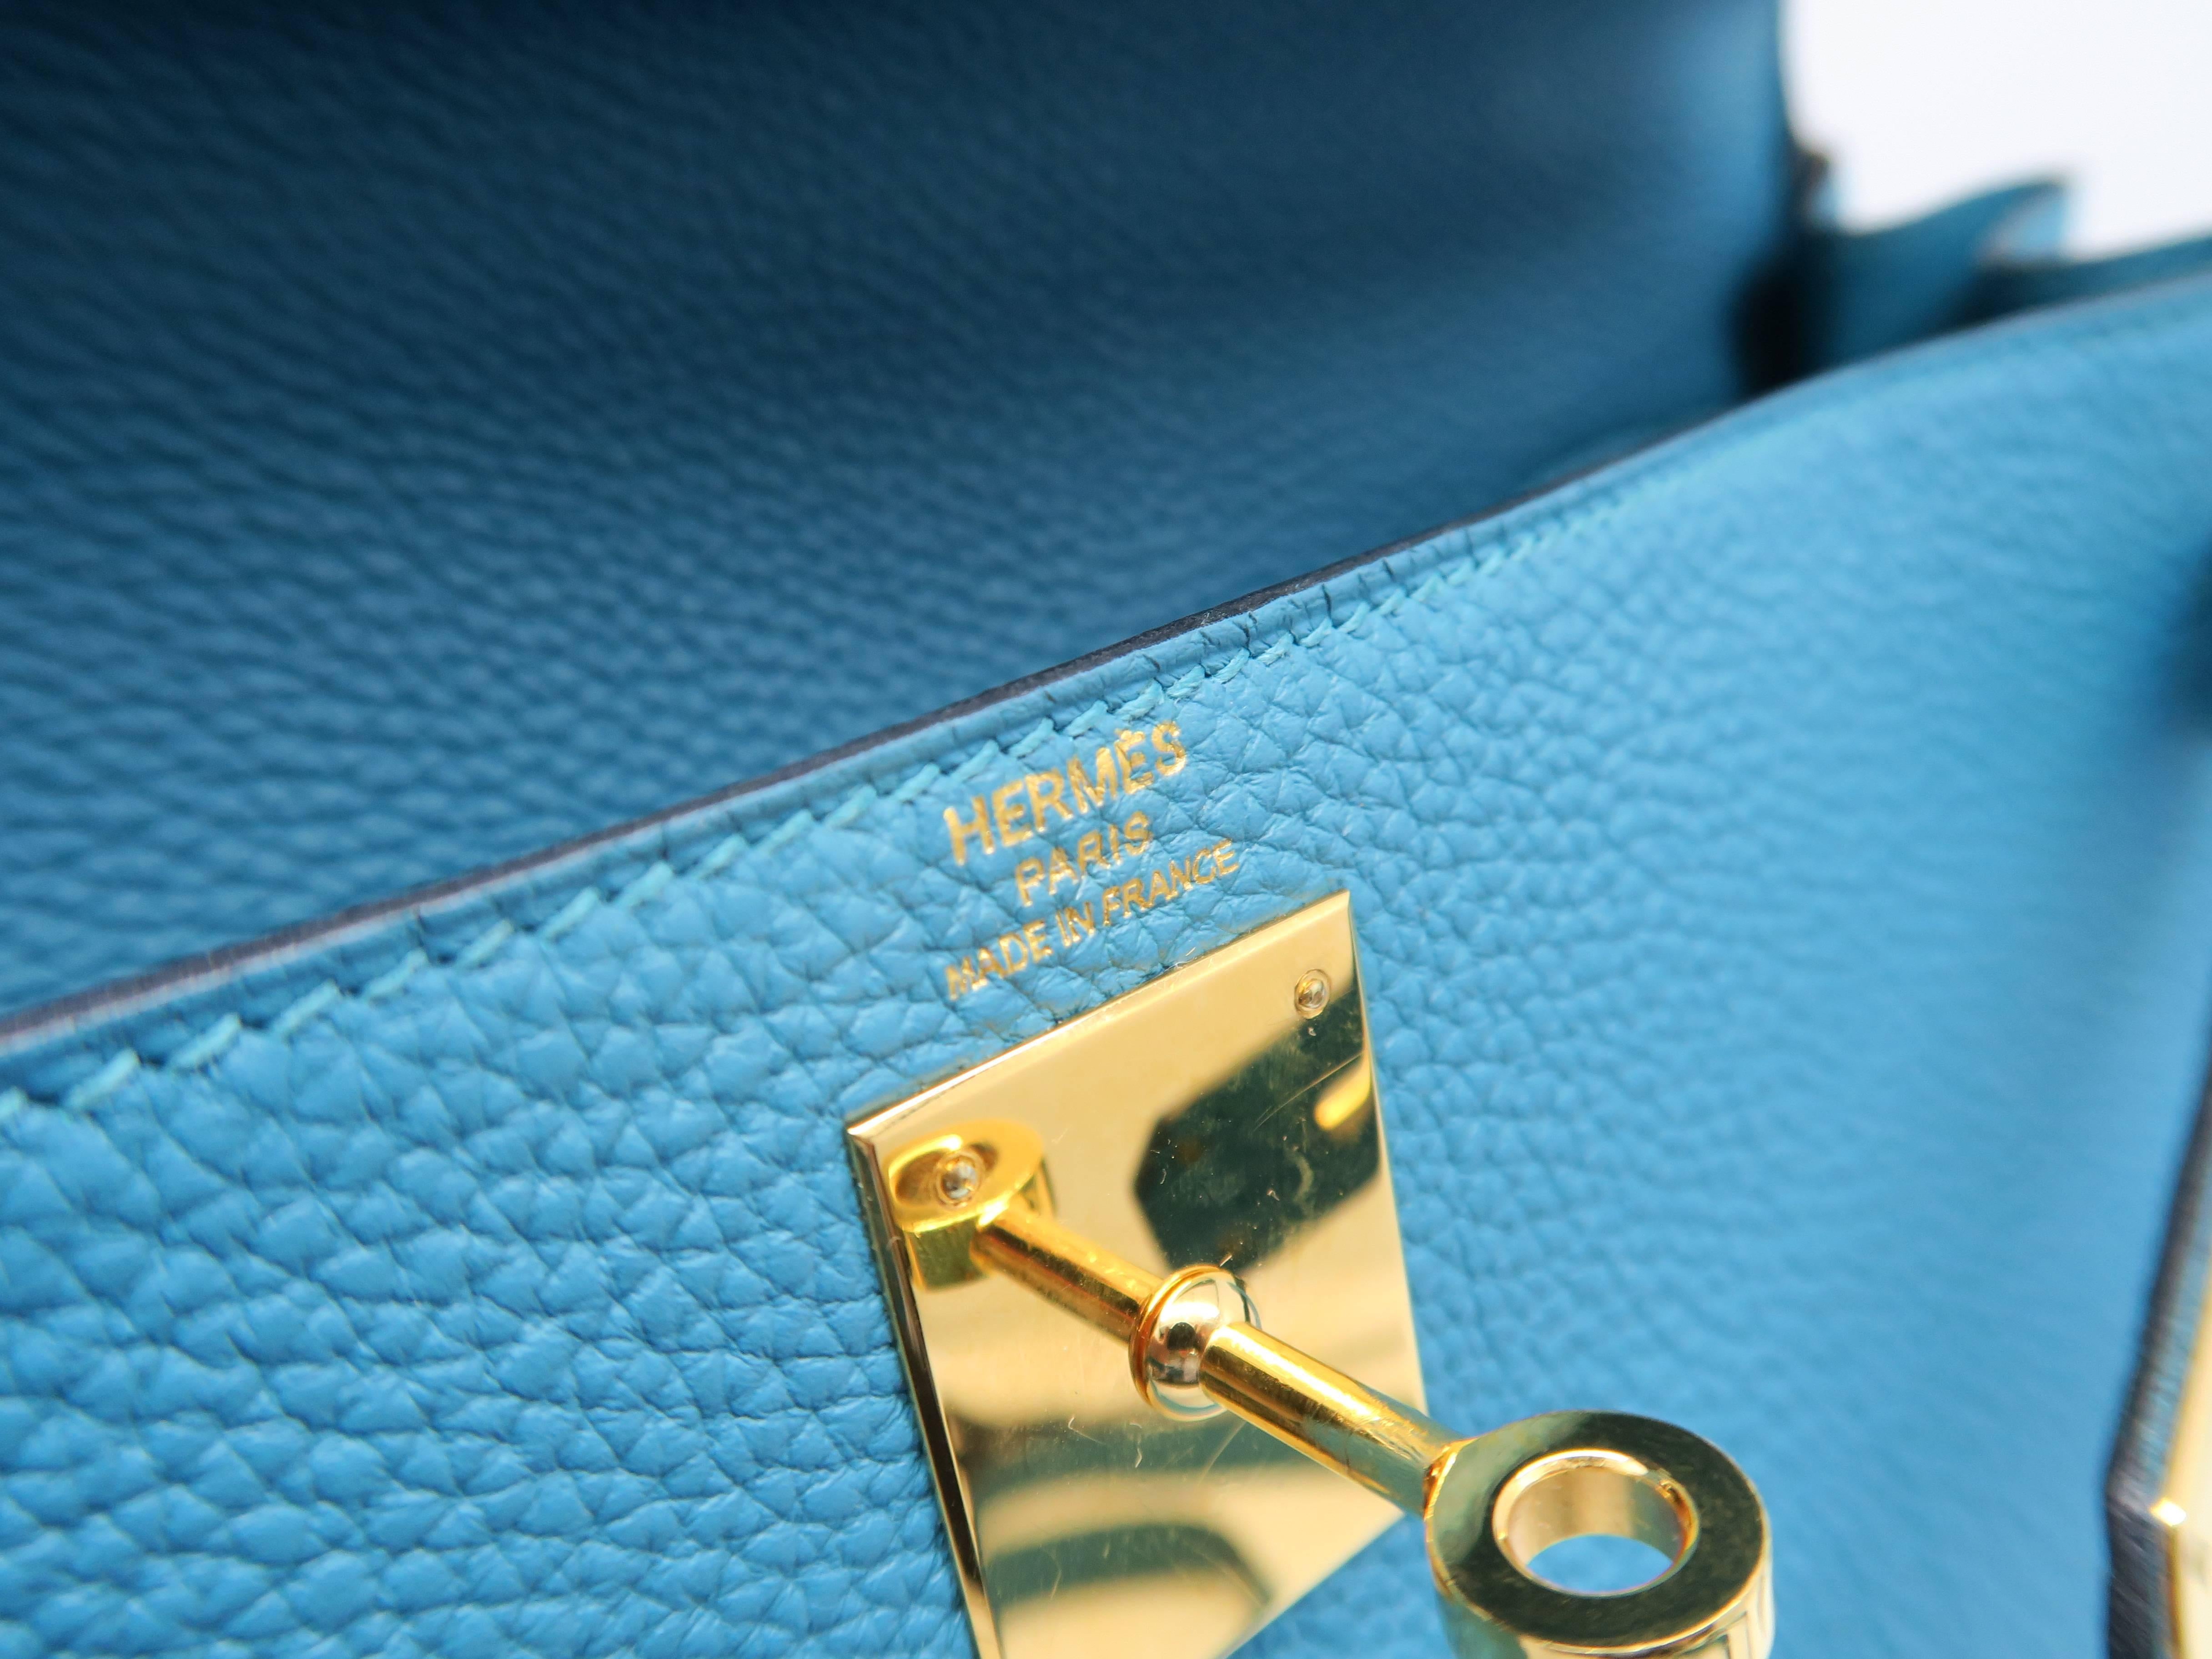 Women's Hermes Kelly 28 Turquoise Blue Togo Leather Gold Metal Top Handle Bag